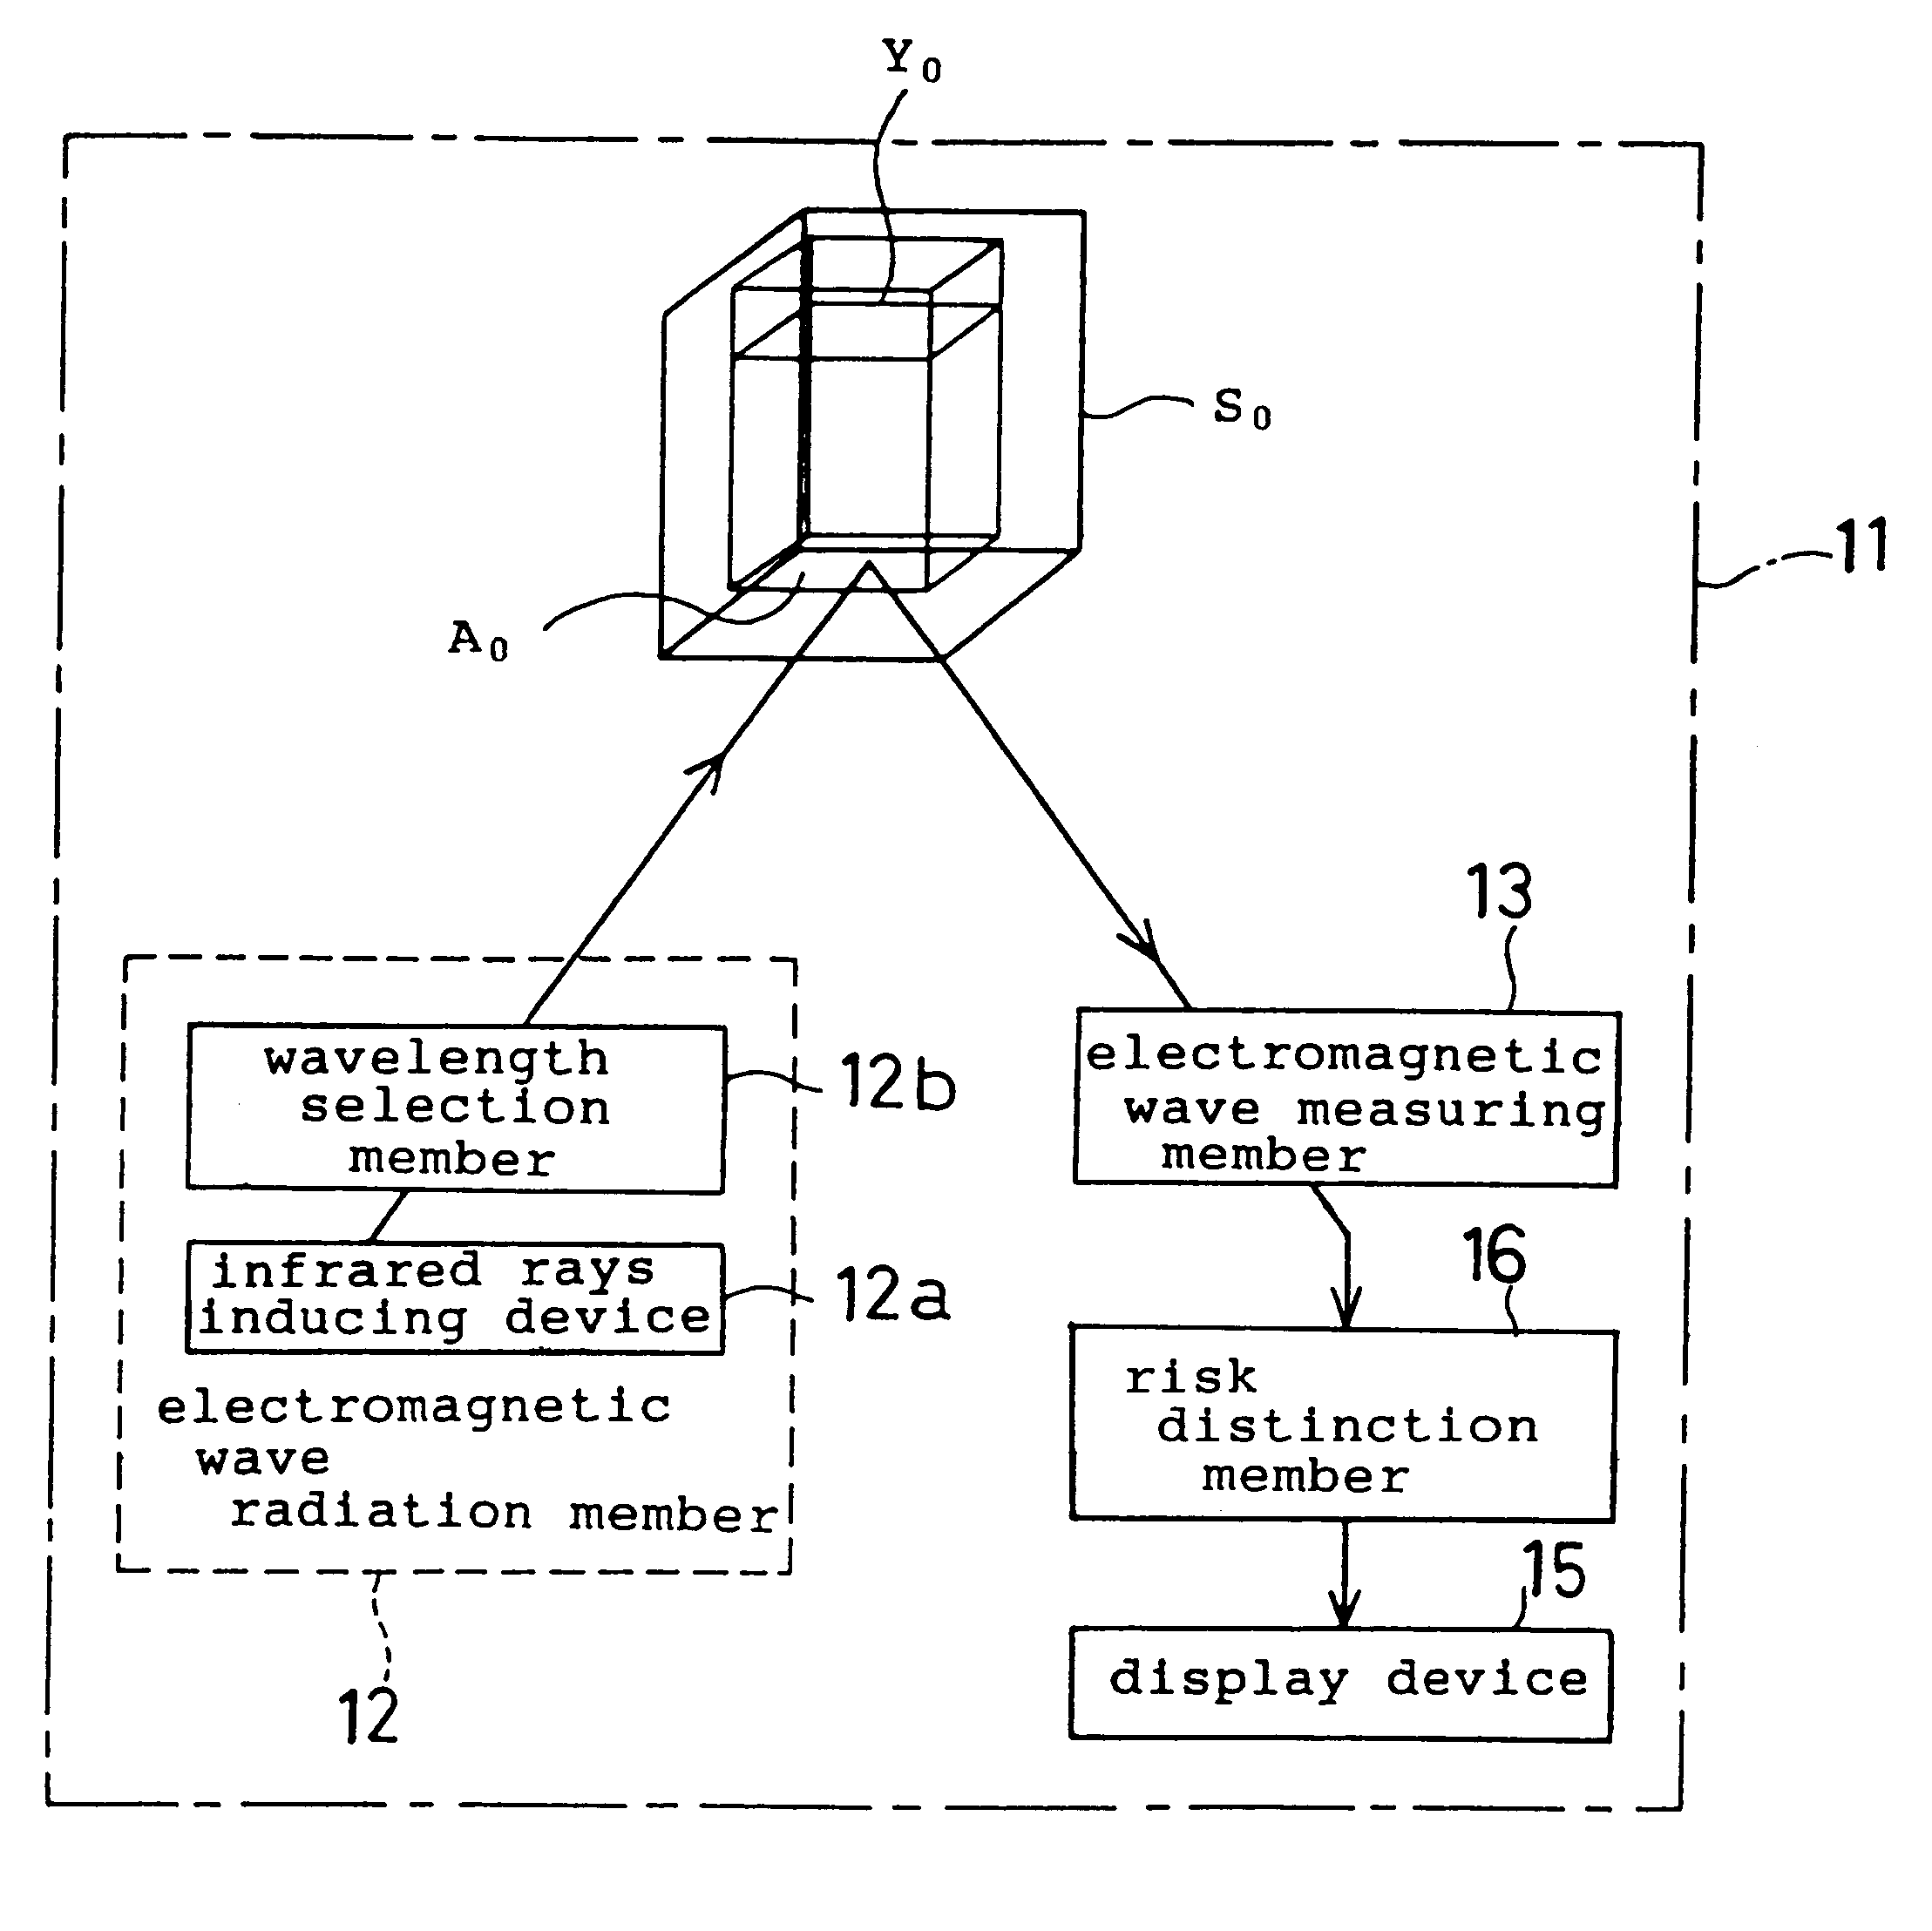 Microbe and cell function control device, a microbial ecology detector device, and a method of controlling a microbe and cell function control device